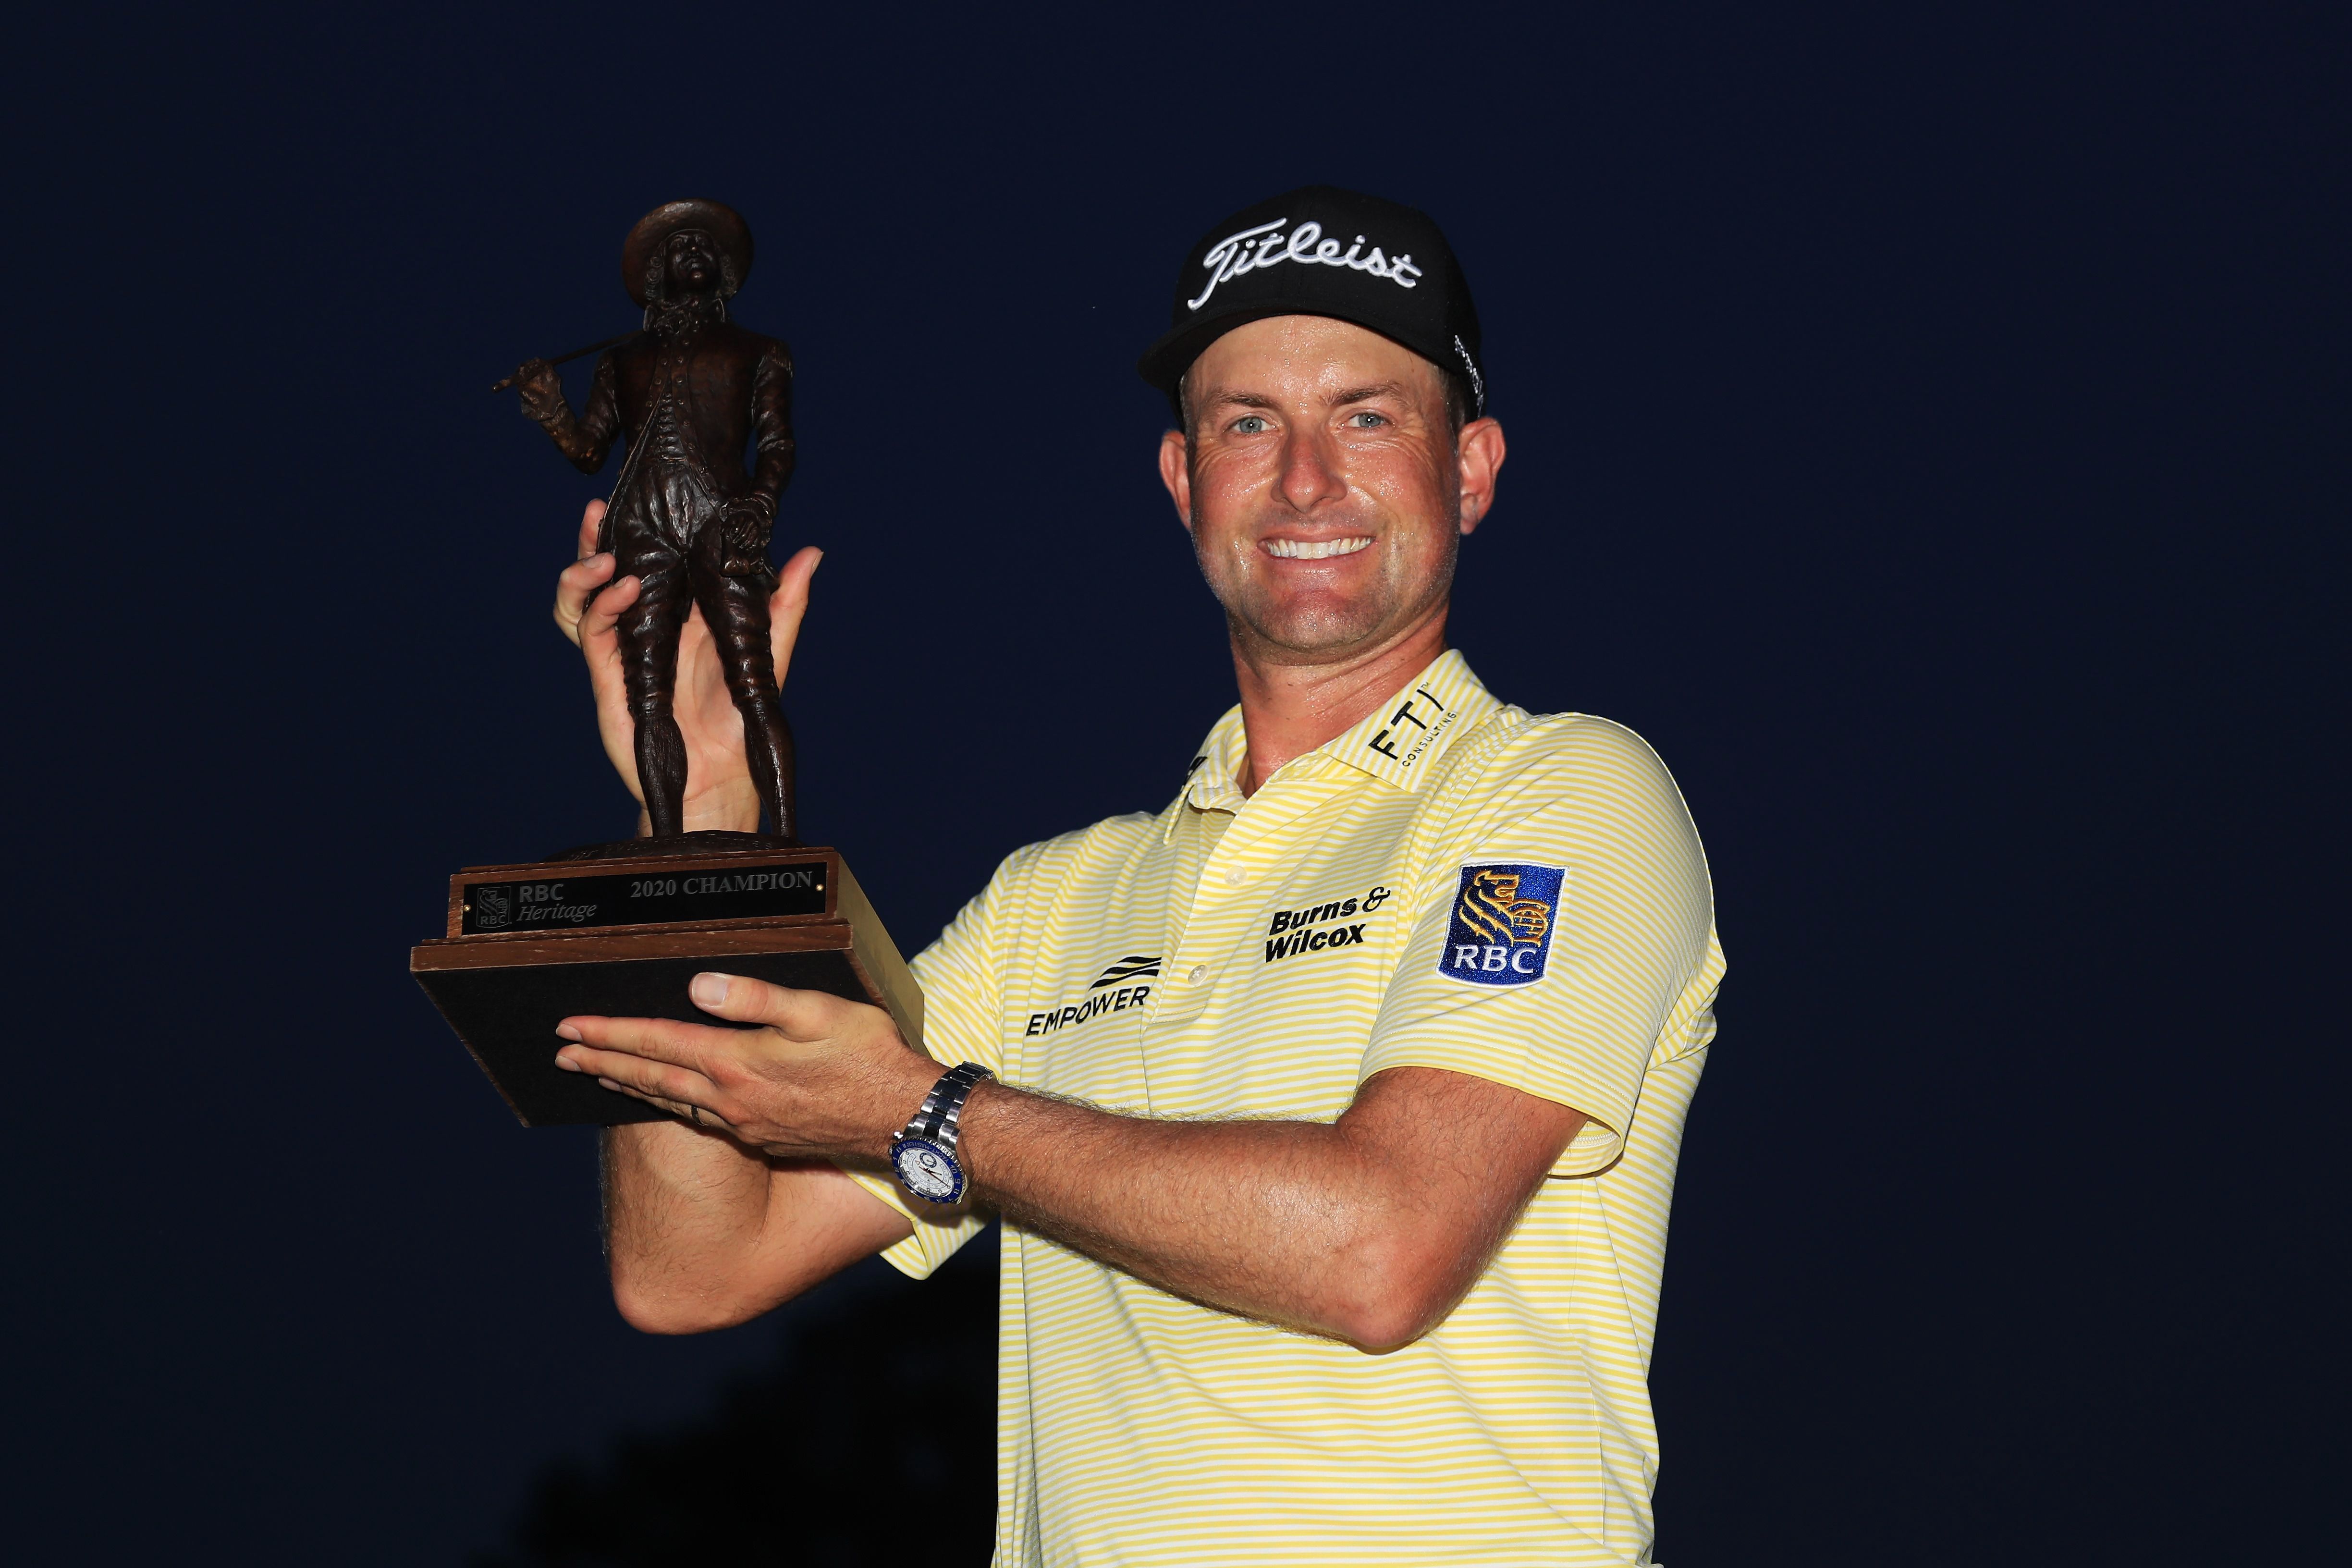 Webb Simpson poses with the trophy